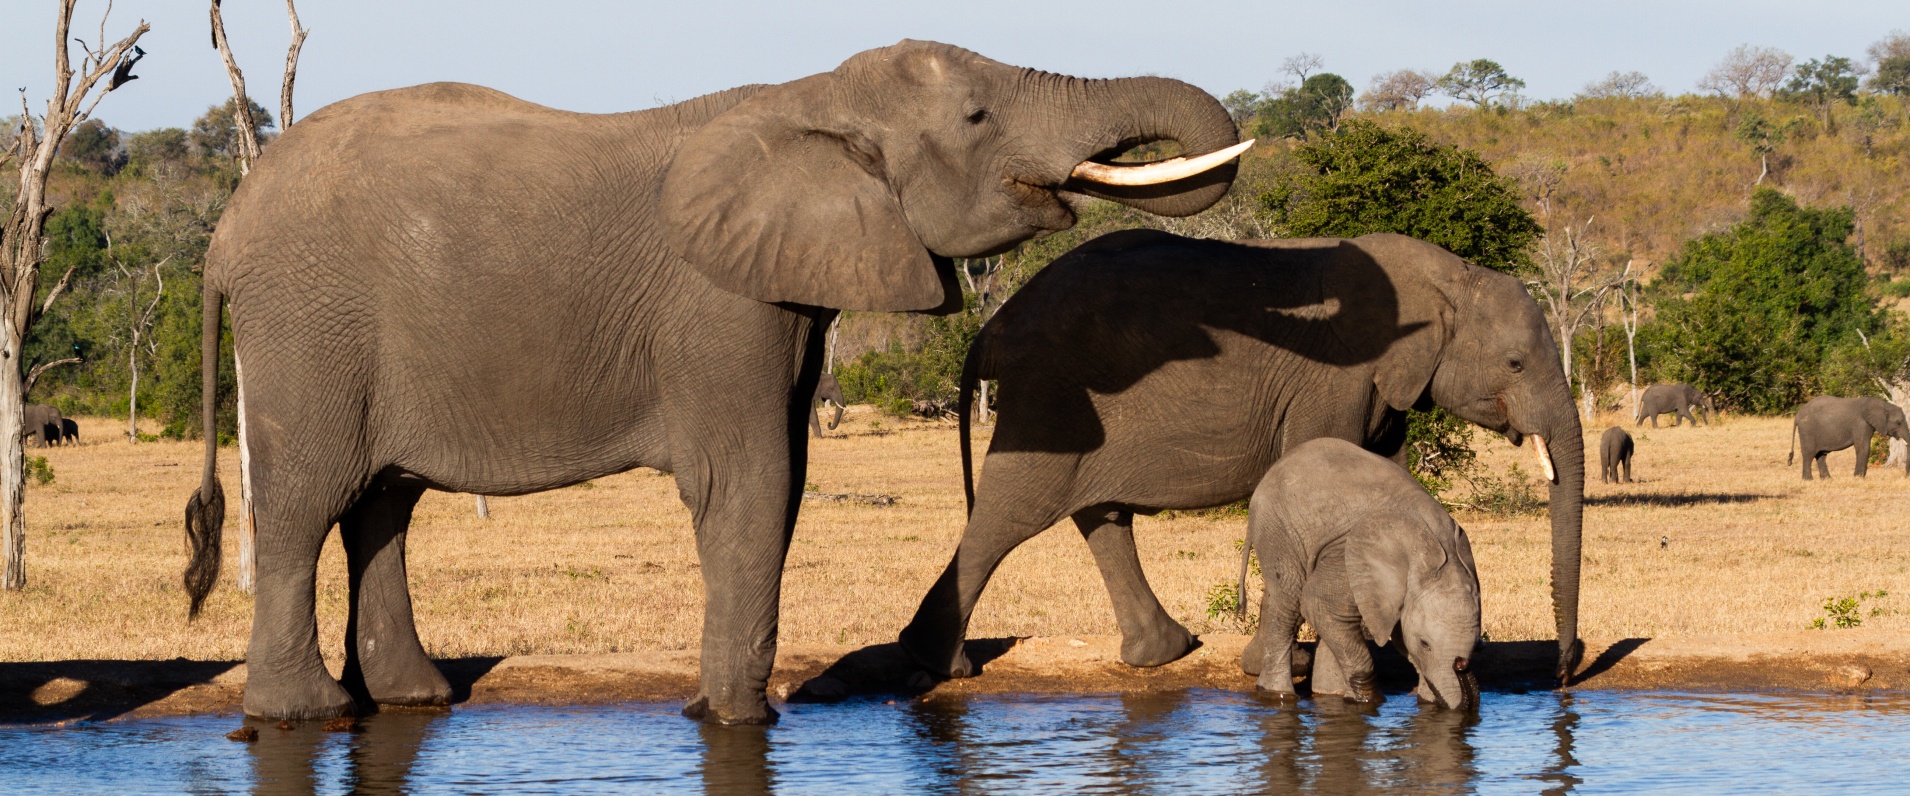 How the elephant got its trunk - Discover Wildlife